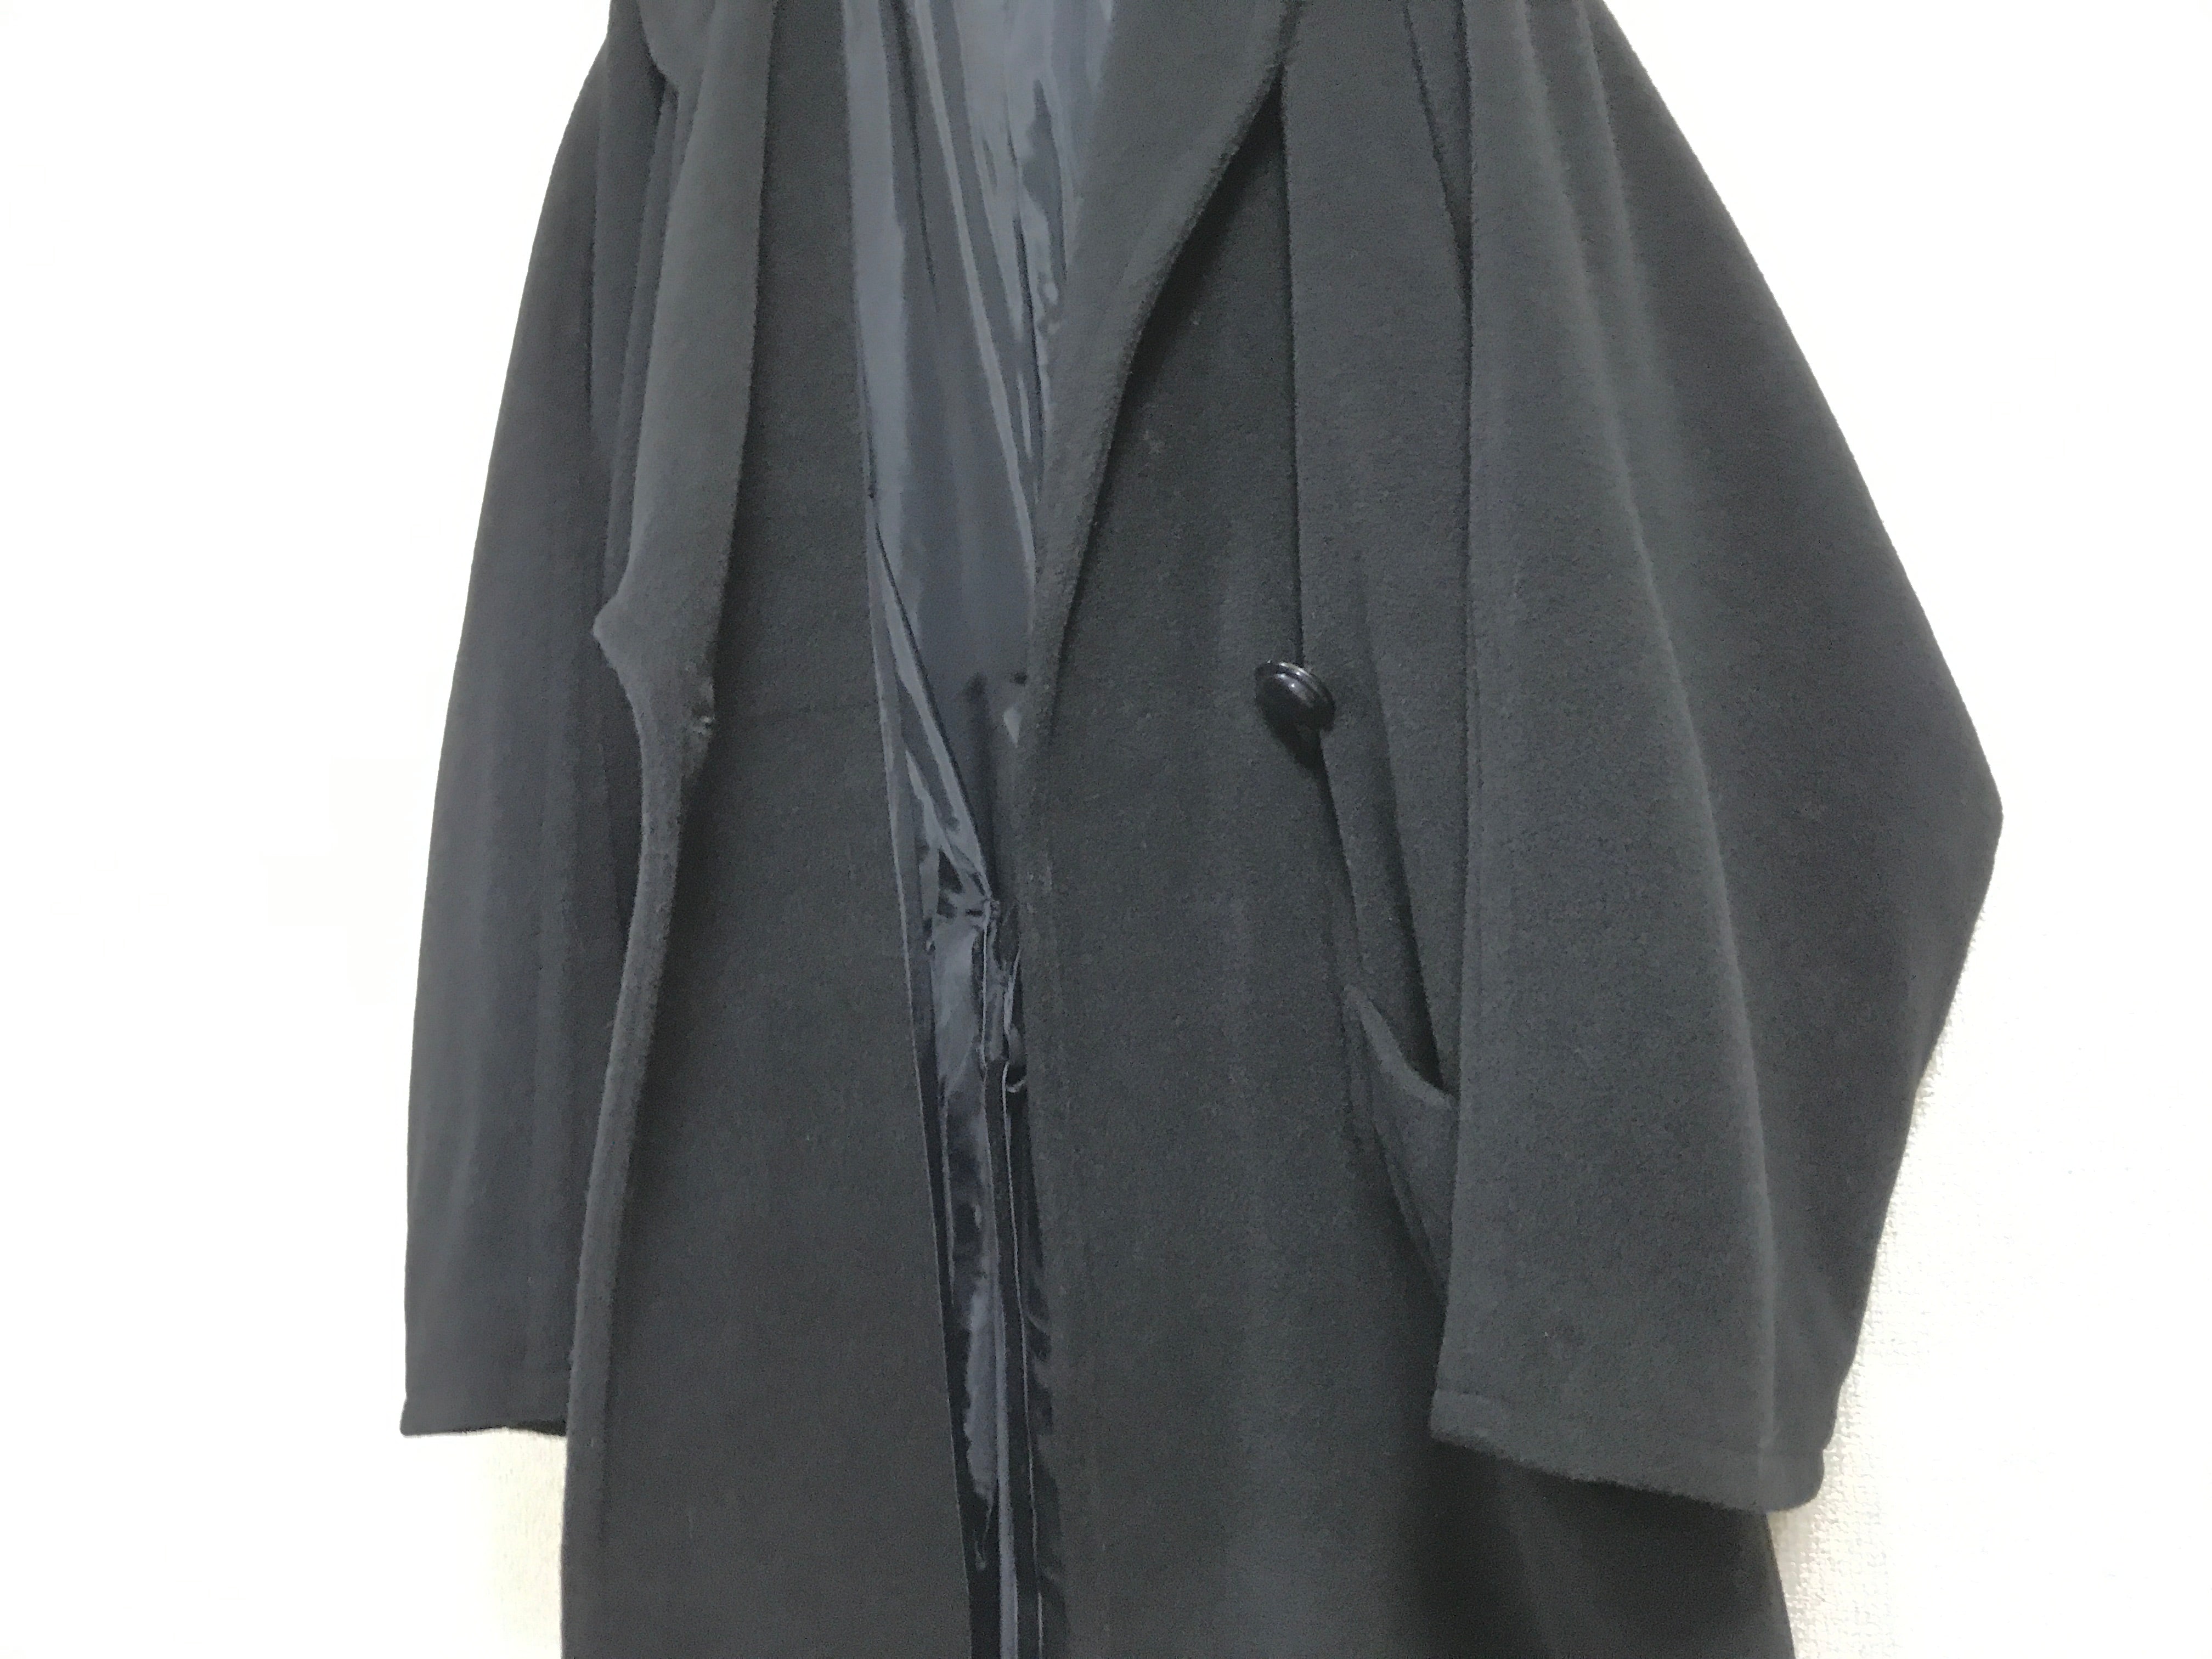 wool double-breasted deformational 2-way coat